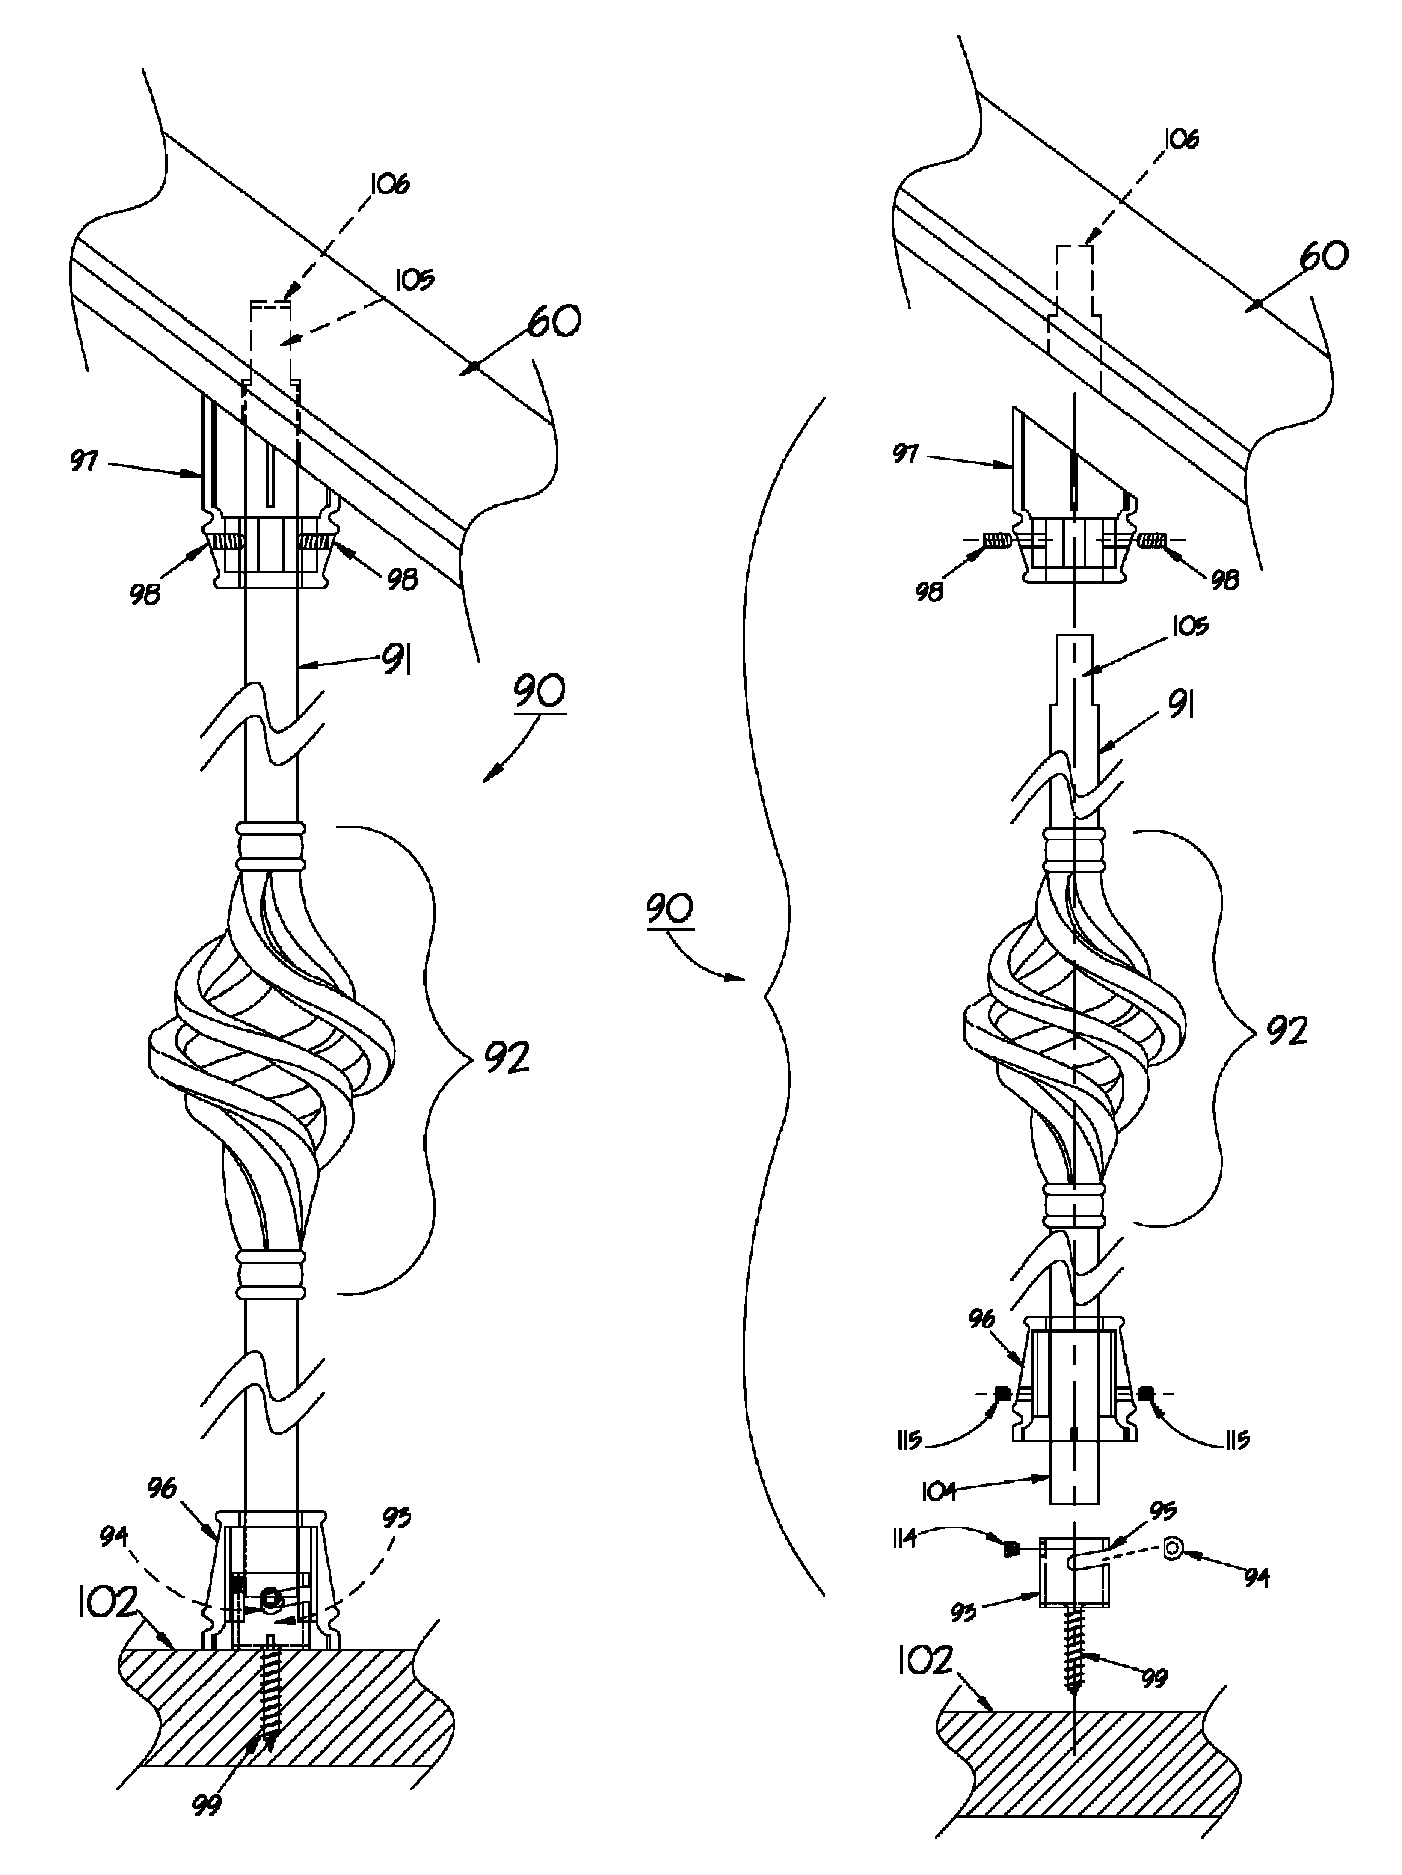 Baluster system and method